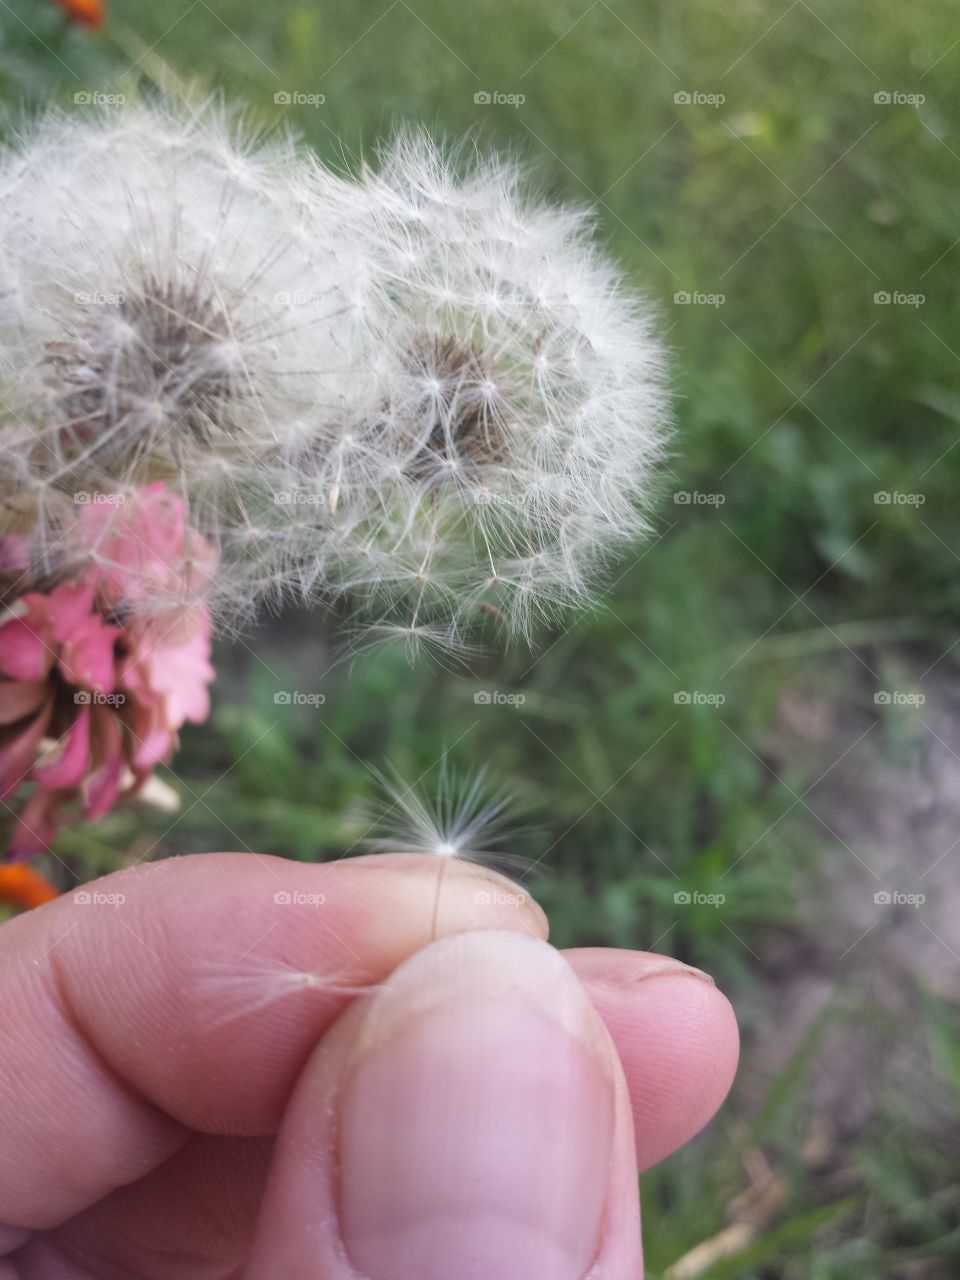 Handful of Wishes